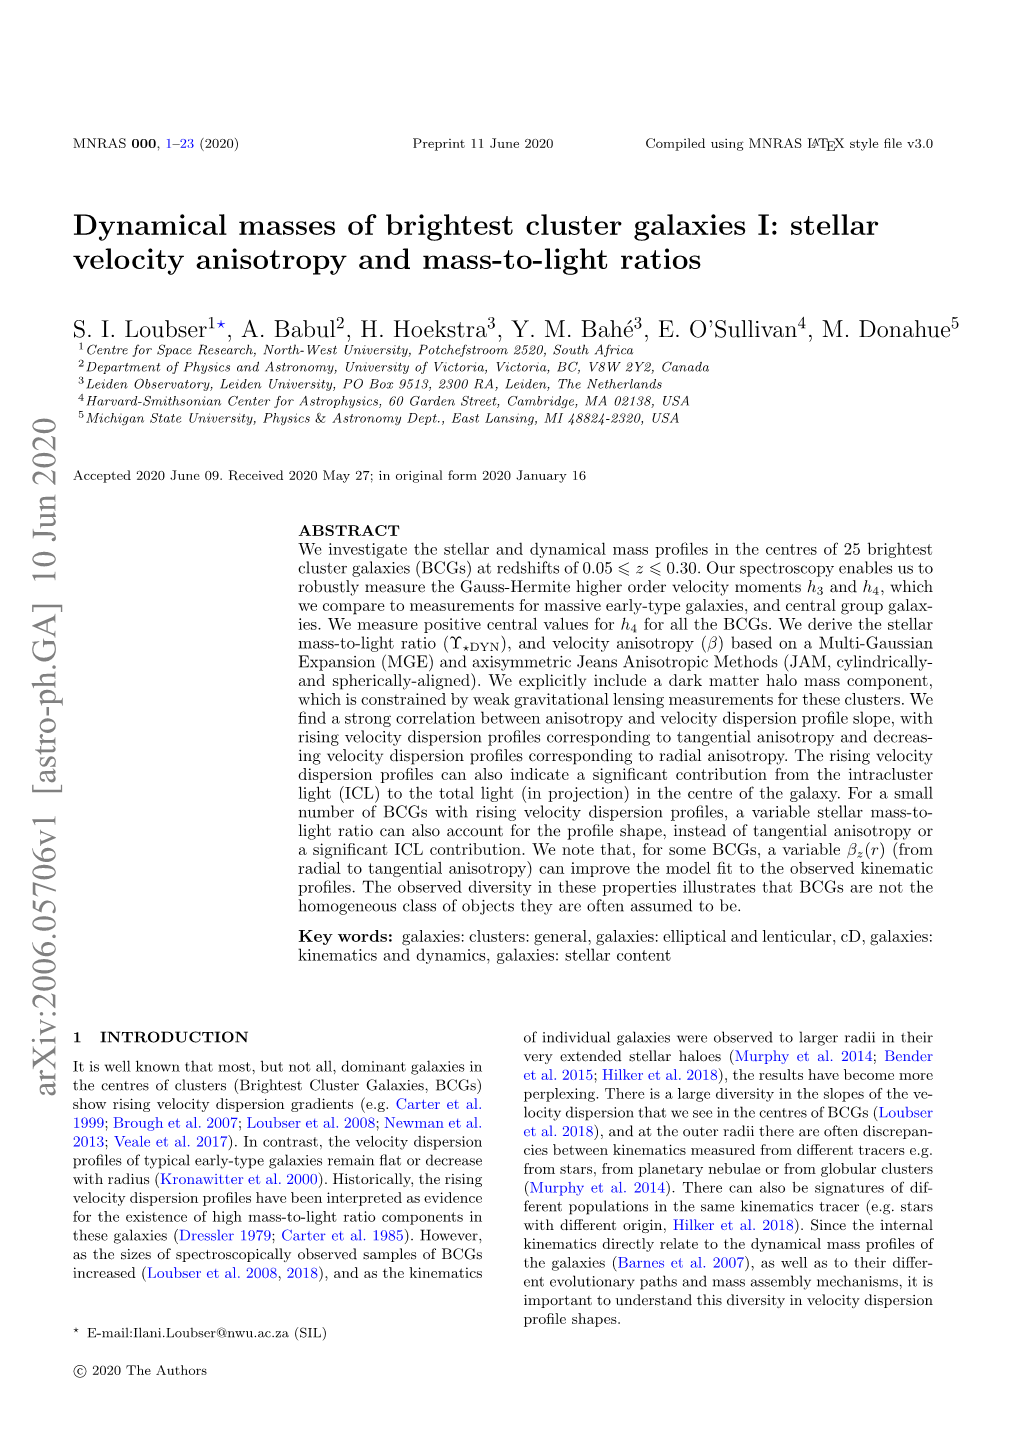 Dynamical Masses of Brightest Cluster Galaxies I: Stellar Velocity Anisotropy and Mass-To-Light Ratios